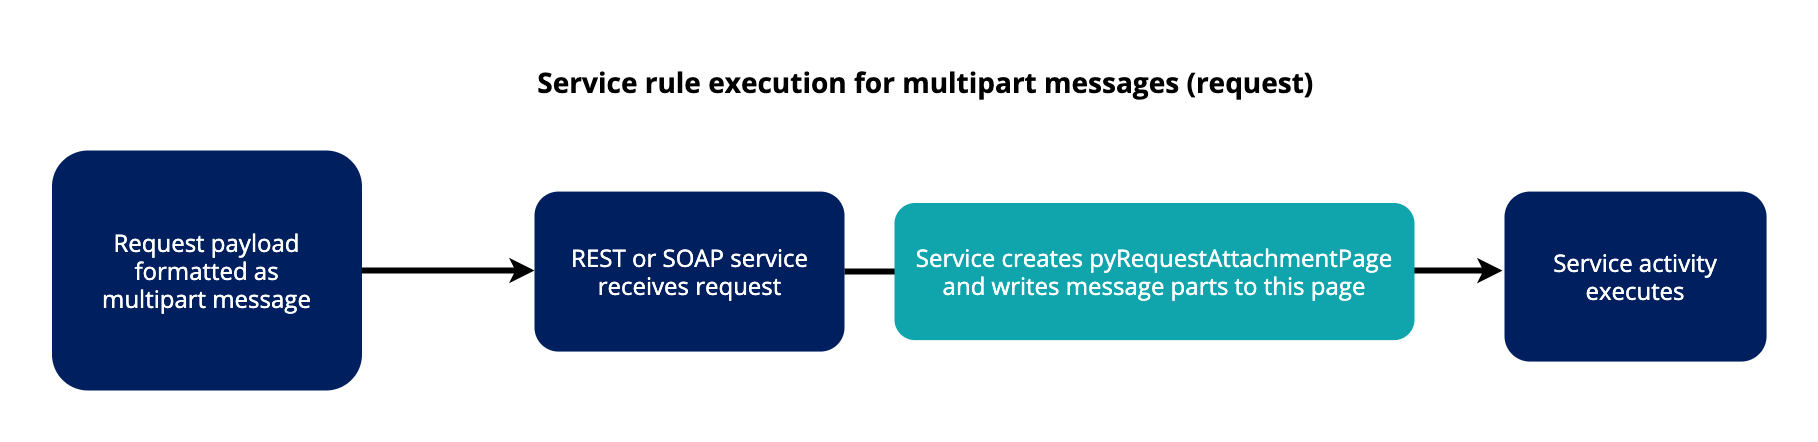 Diagram of service rule execution for multipart messages request